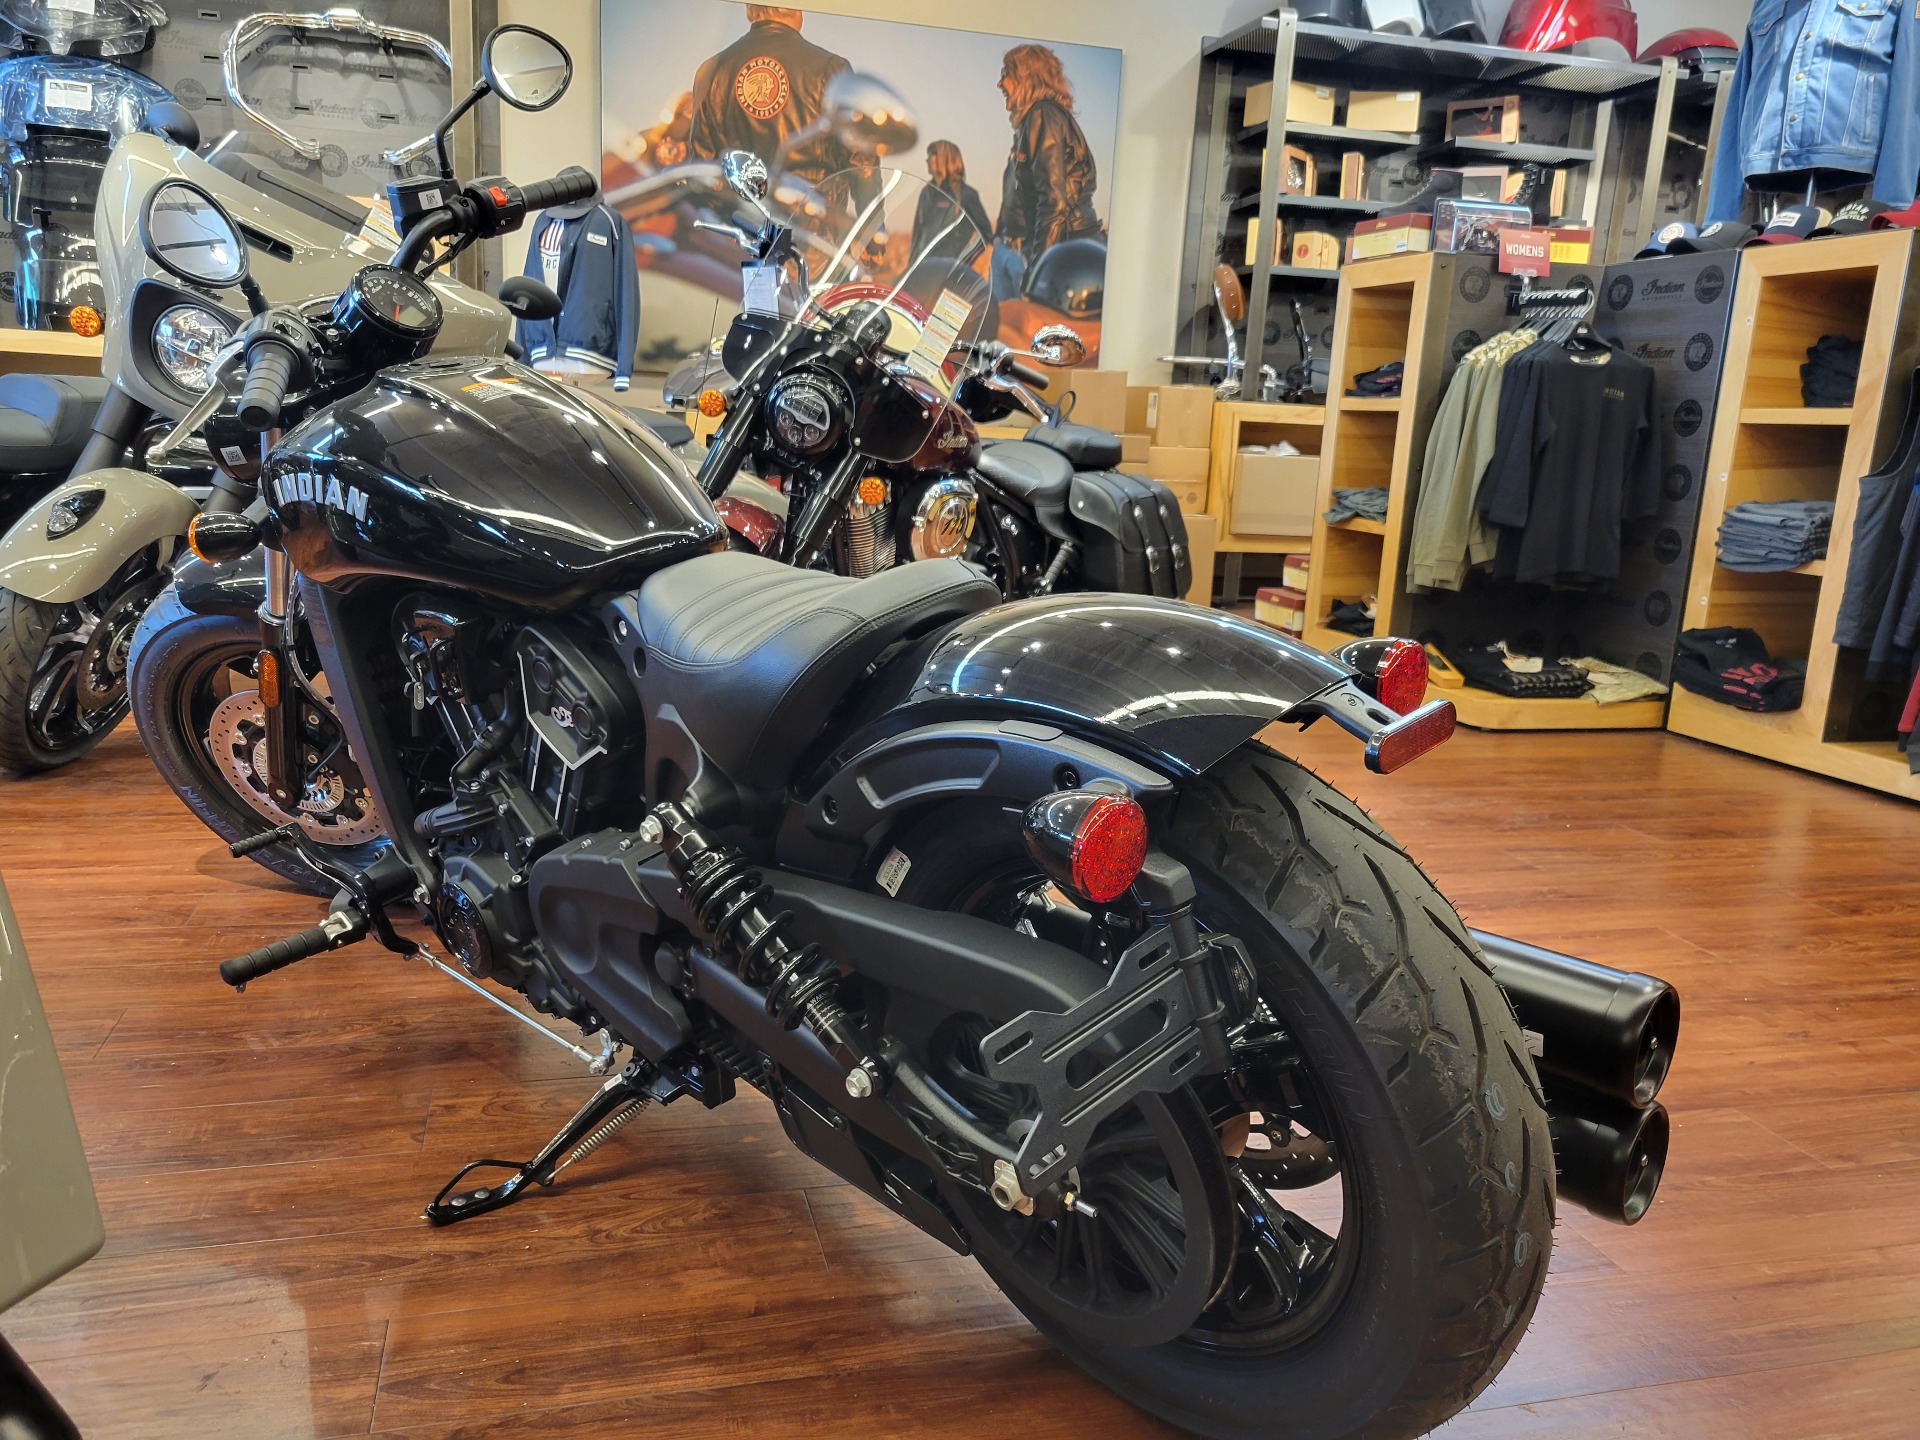 2022 Indian Scout® Bobber Sixty ABS in Nashville, Tennessee - Photo 2